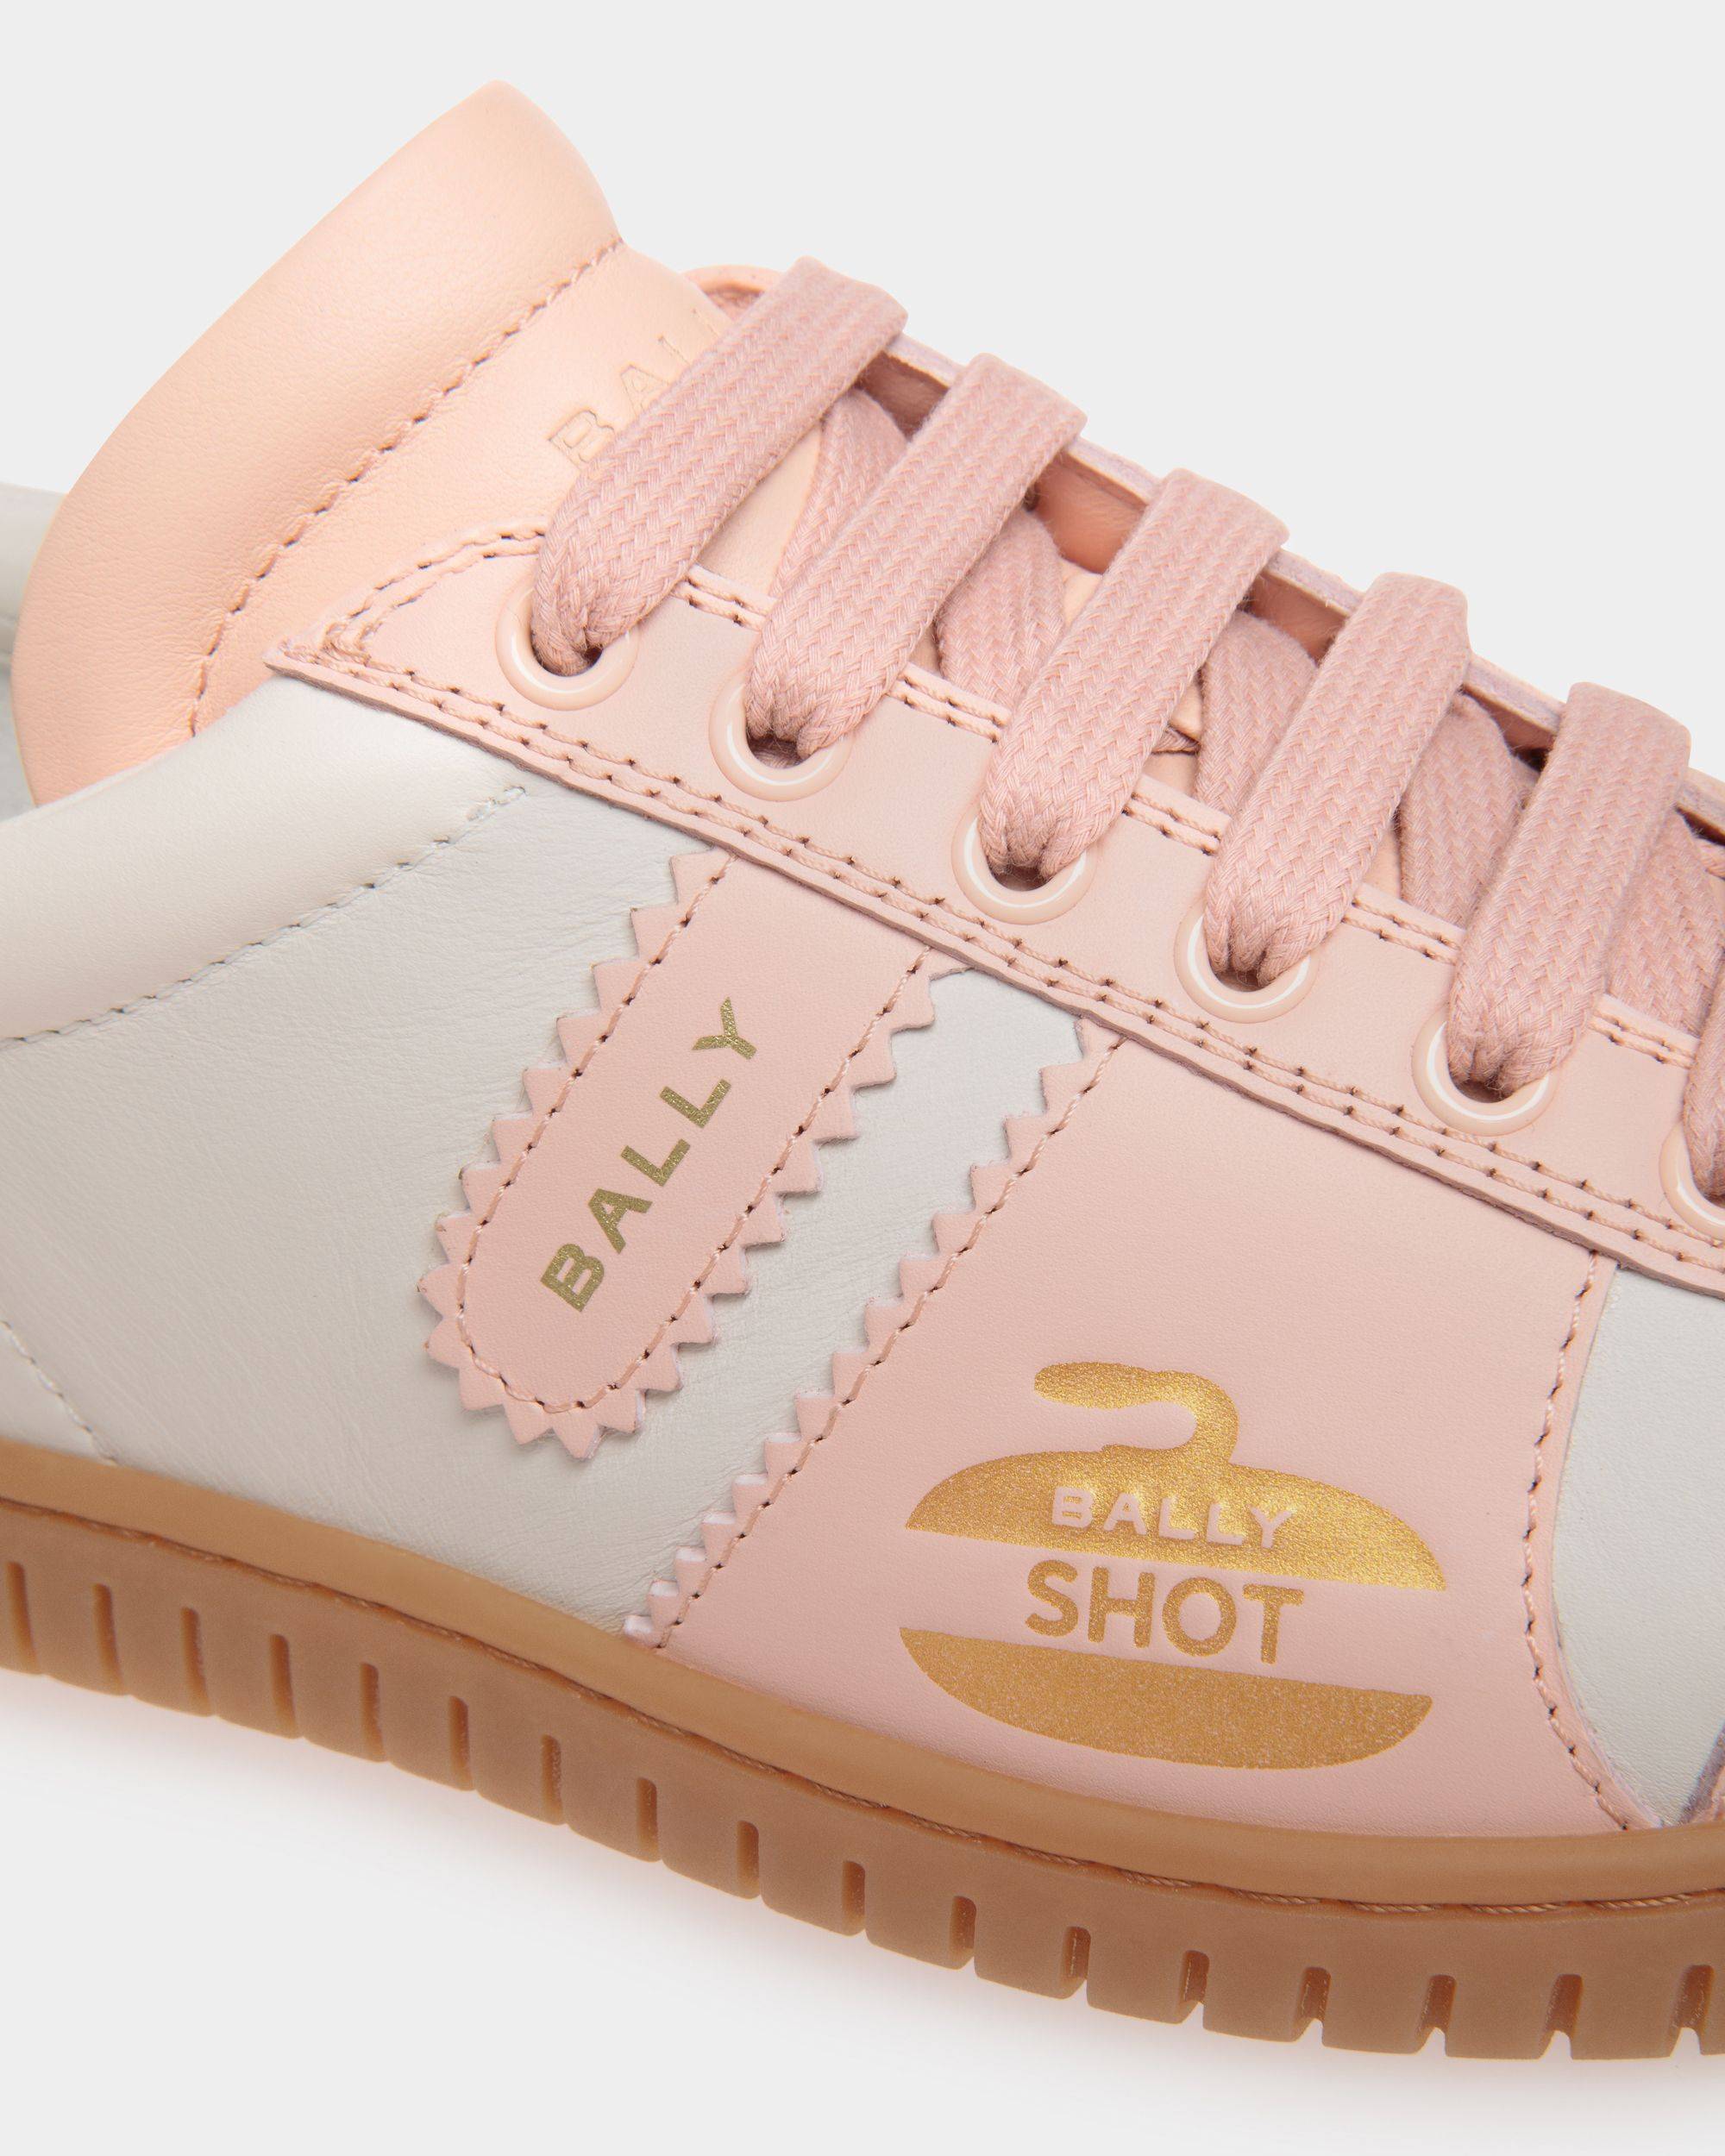 Player | Women's Sneaker in White and Baby Pink Leather | Bally | Still Life Detail